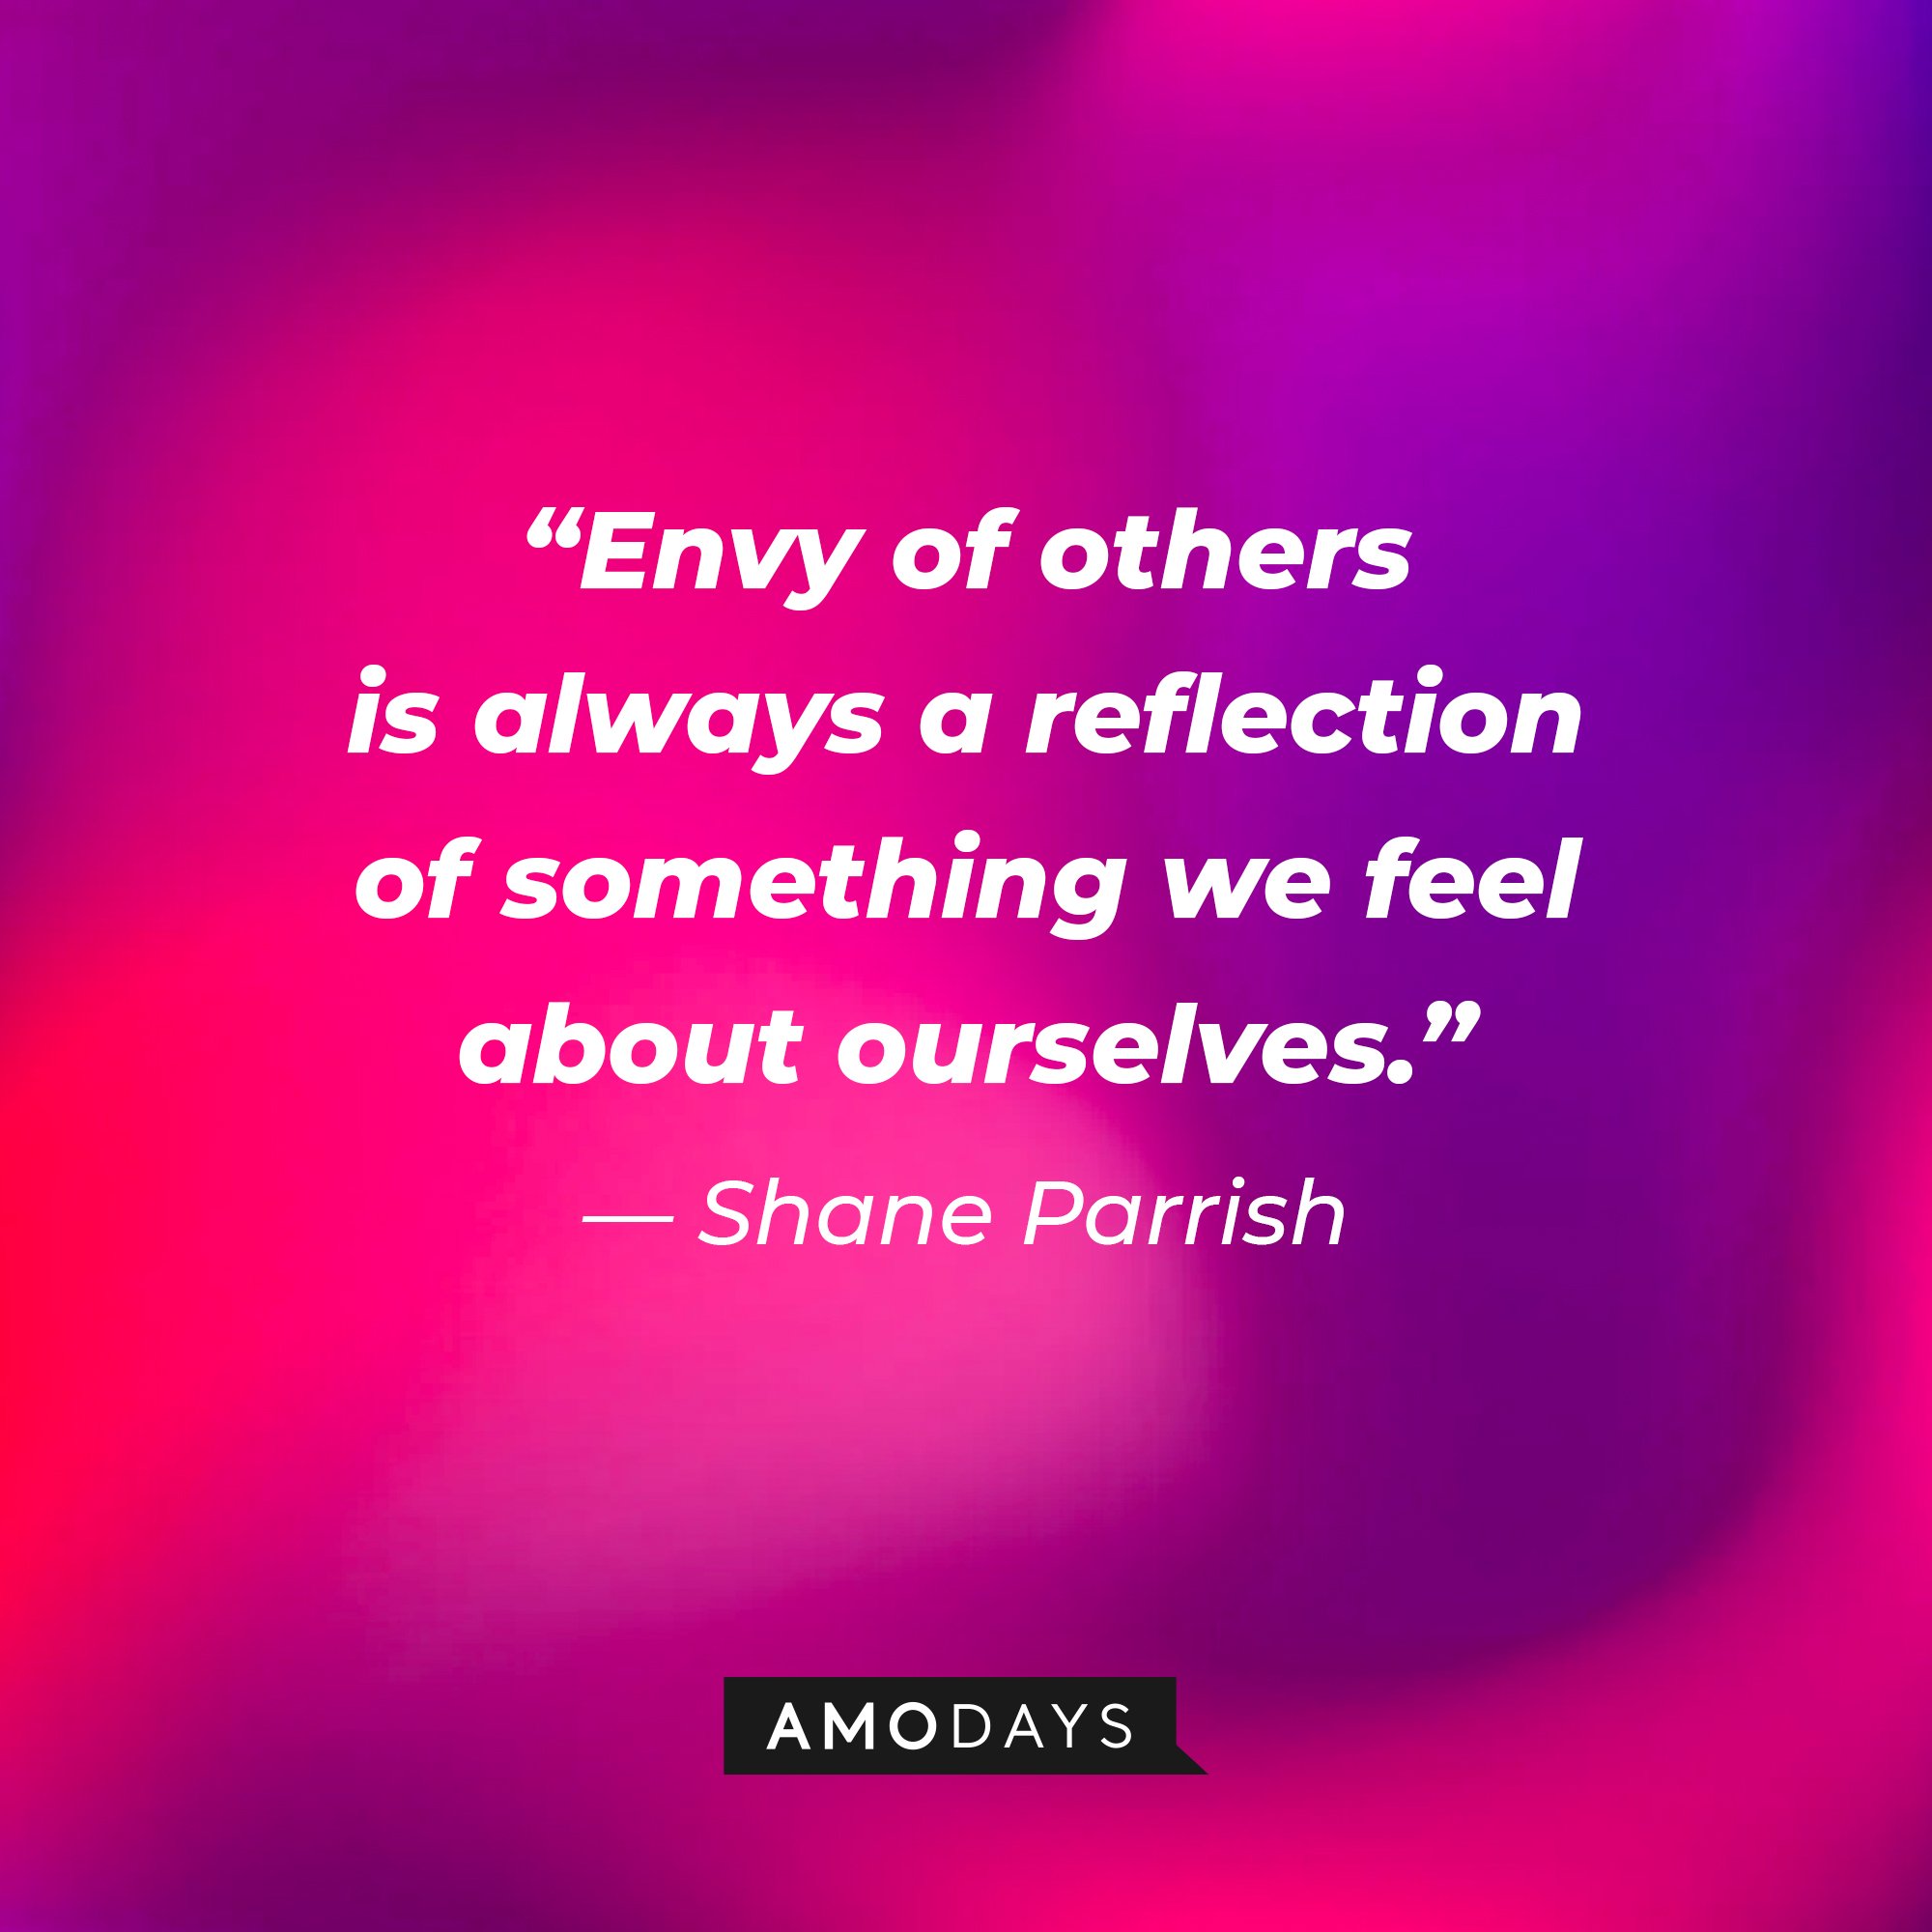 Shane Parrish's quote: “Envy of others is always a reflection of something we feel about ourselves.” | Image: AmoDays